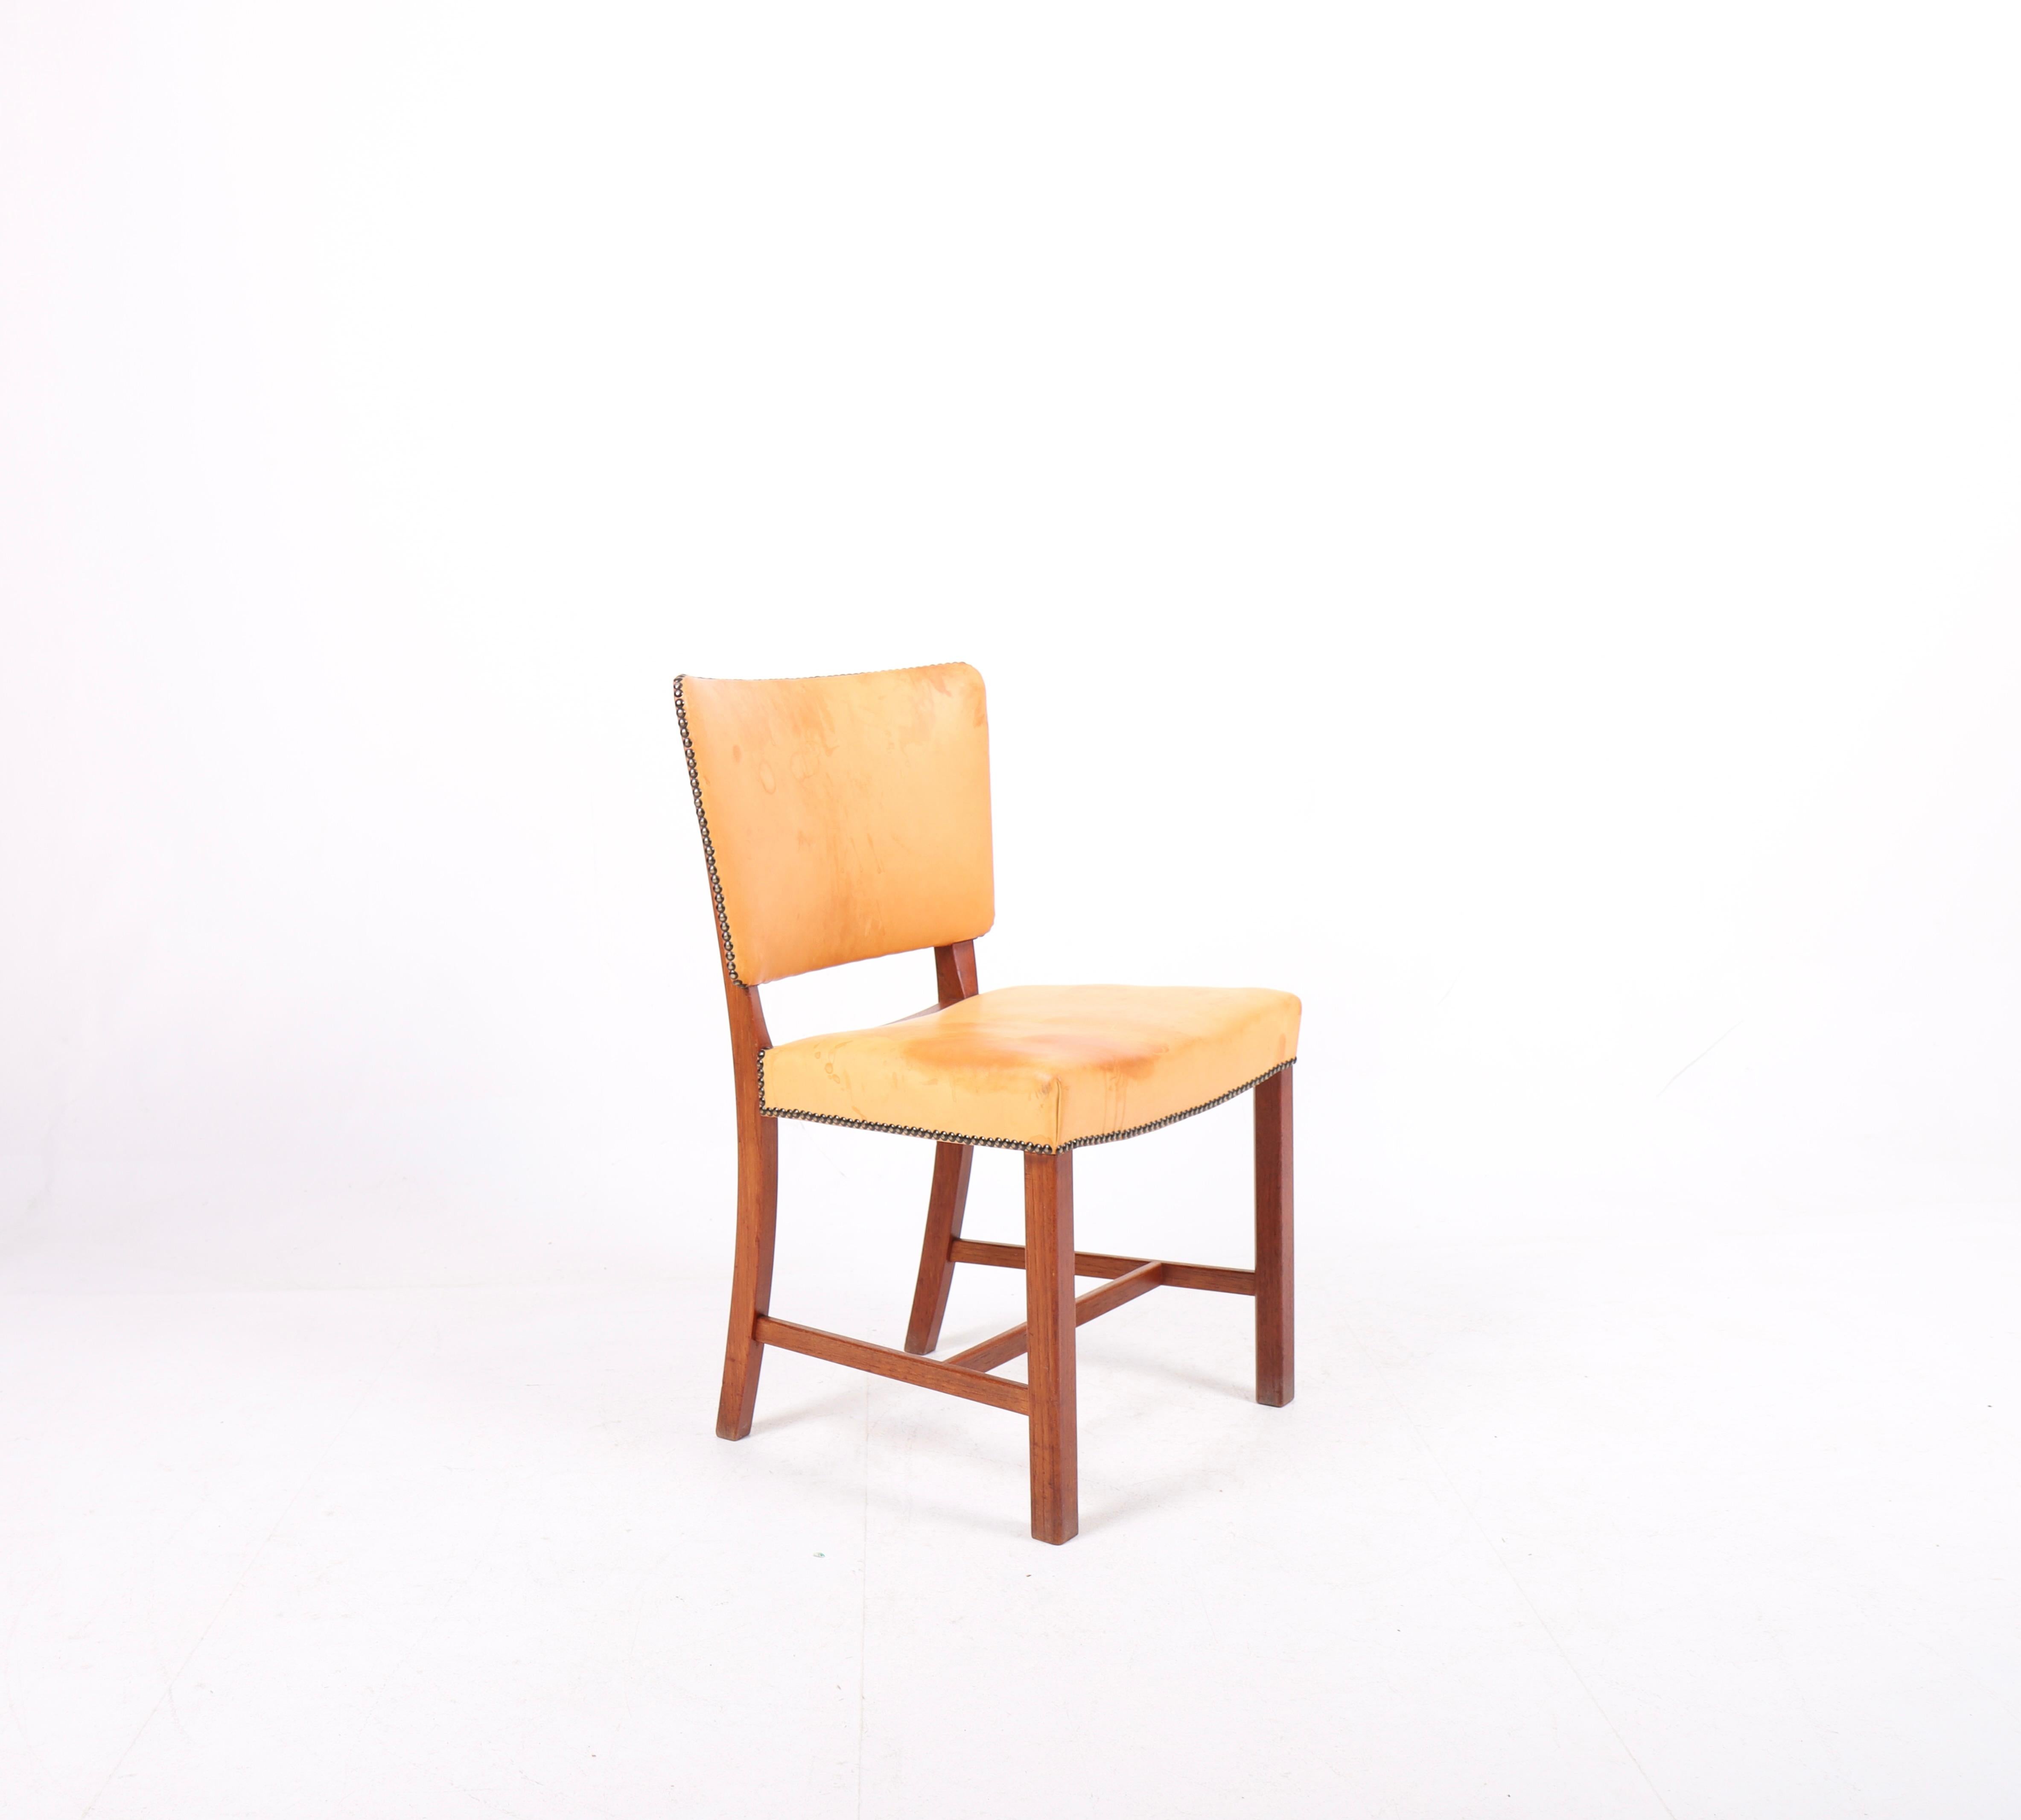 Side chair in teak and patinated leather, designed by Stig Thoresen Lassen and made by Henrik Wørts cabinetmakers. Great condition.